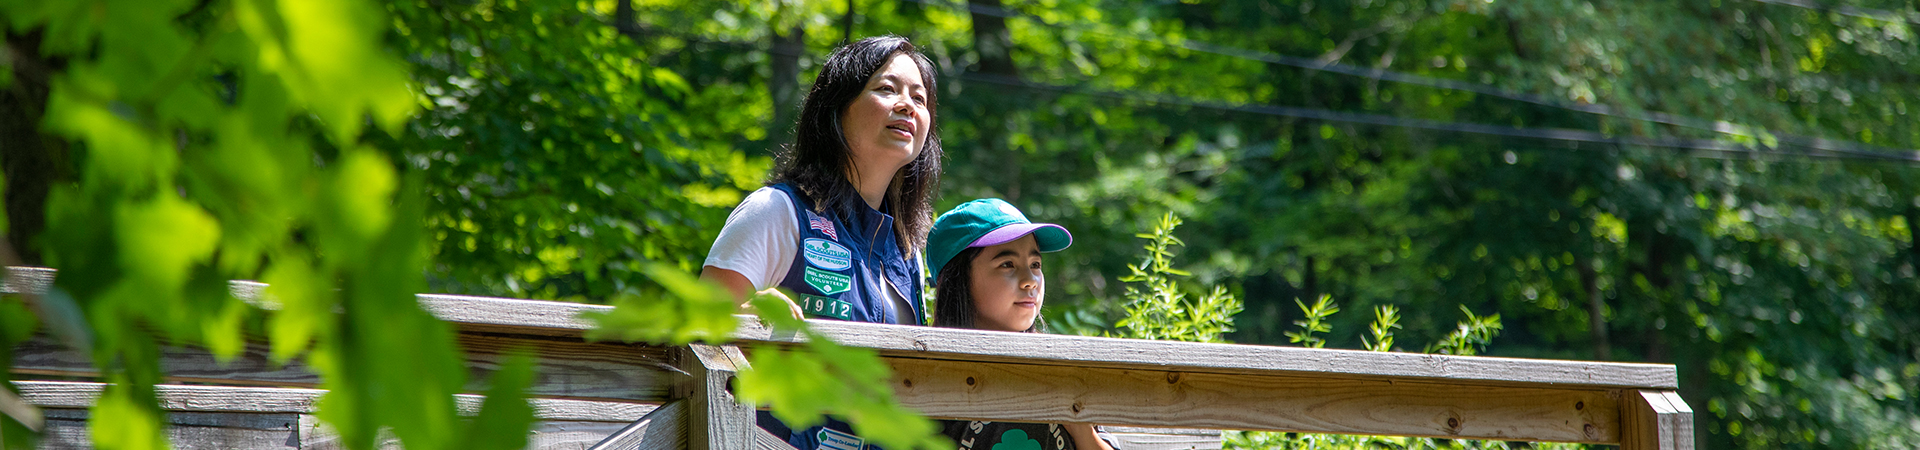  girl scout volunteer parent with young girl hiking outside at state park 